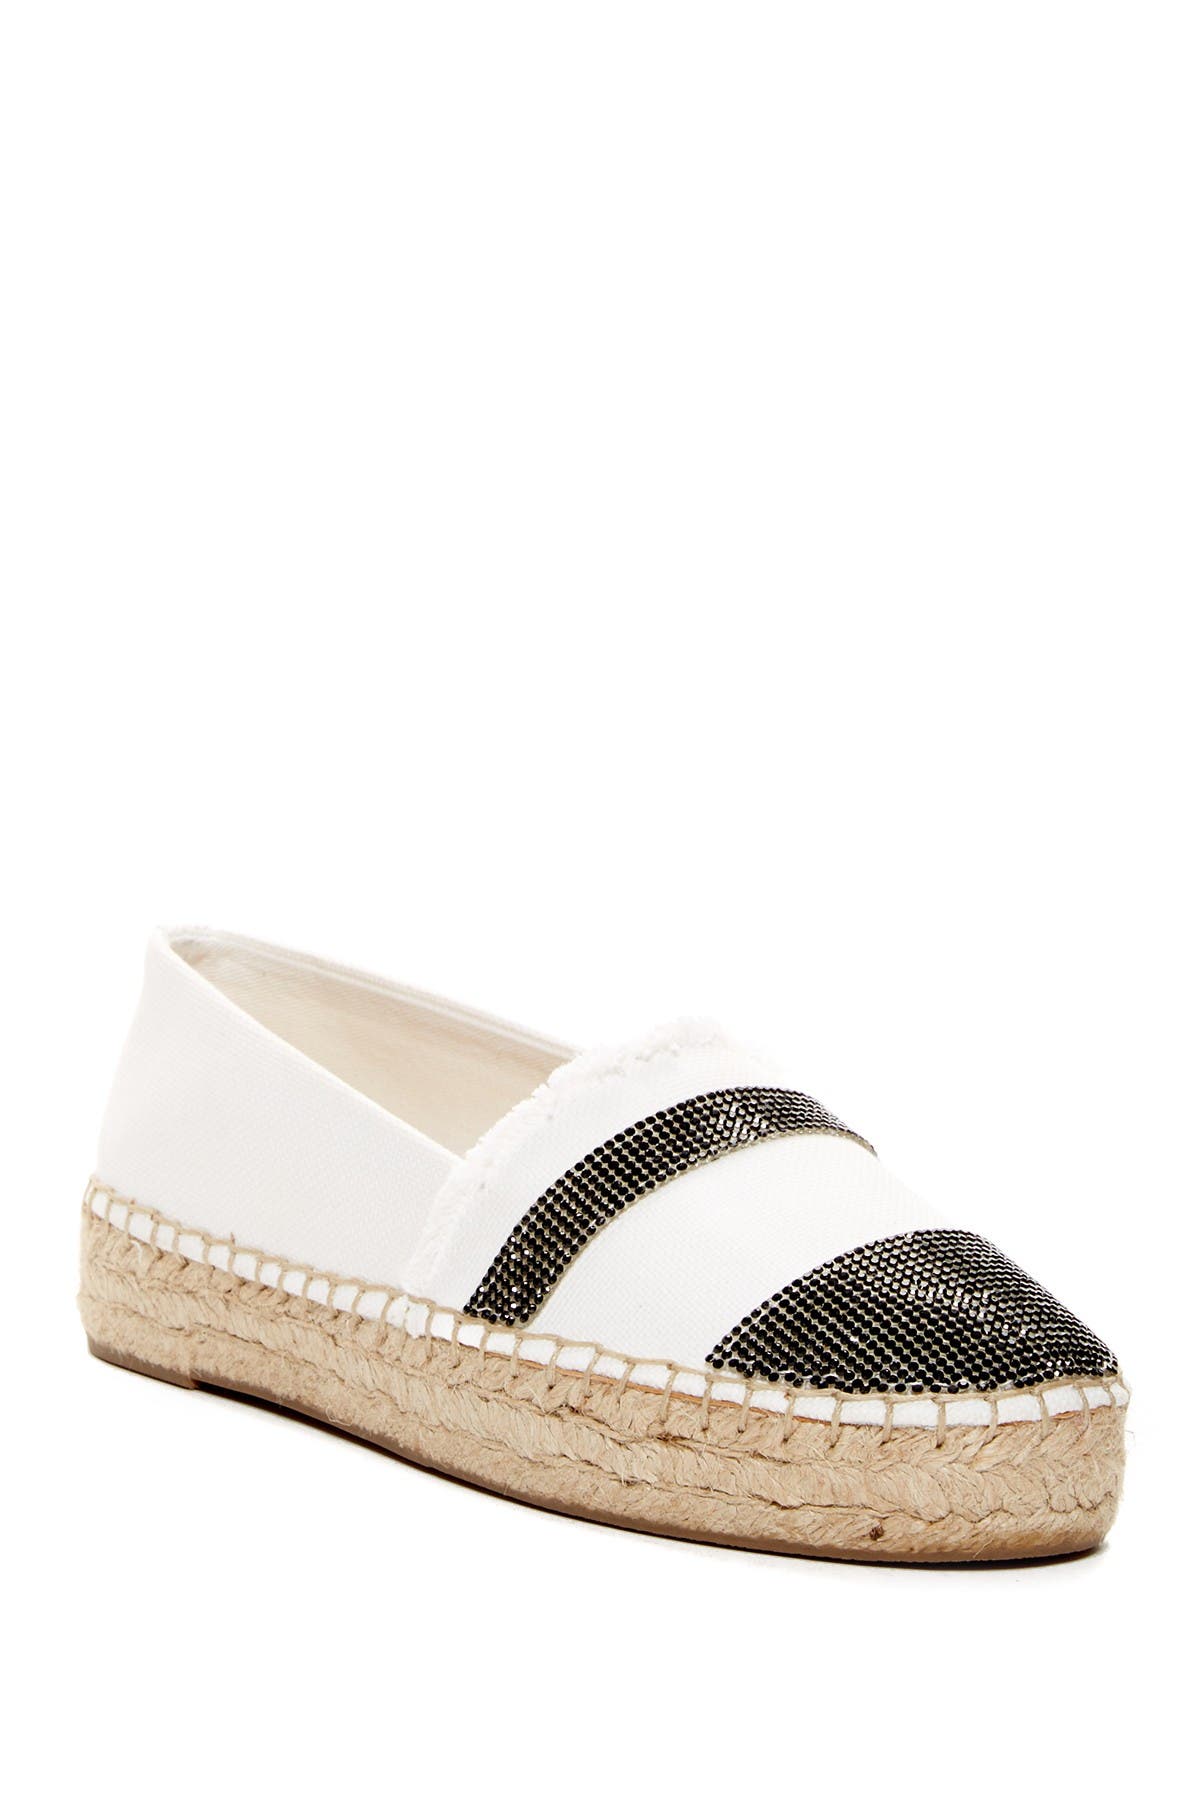 kendall and kylie espadrille flats